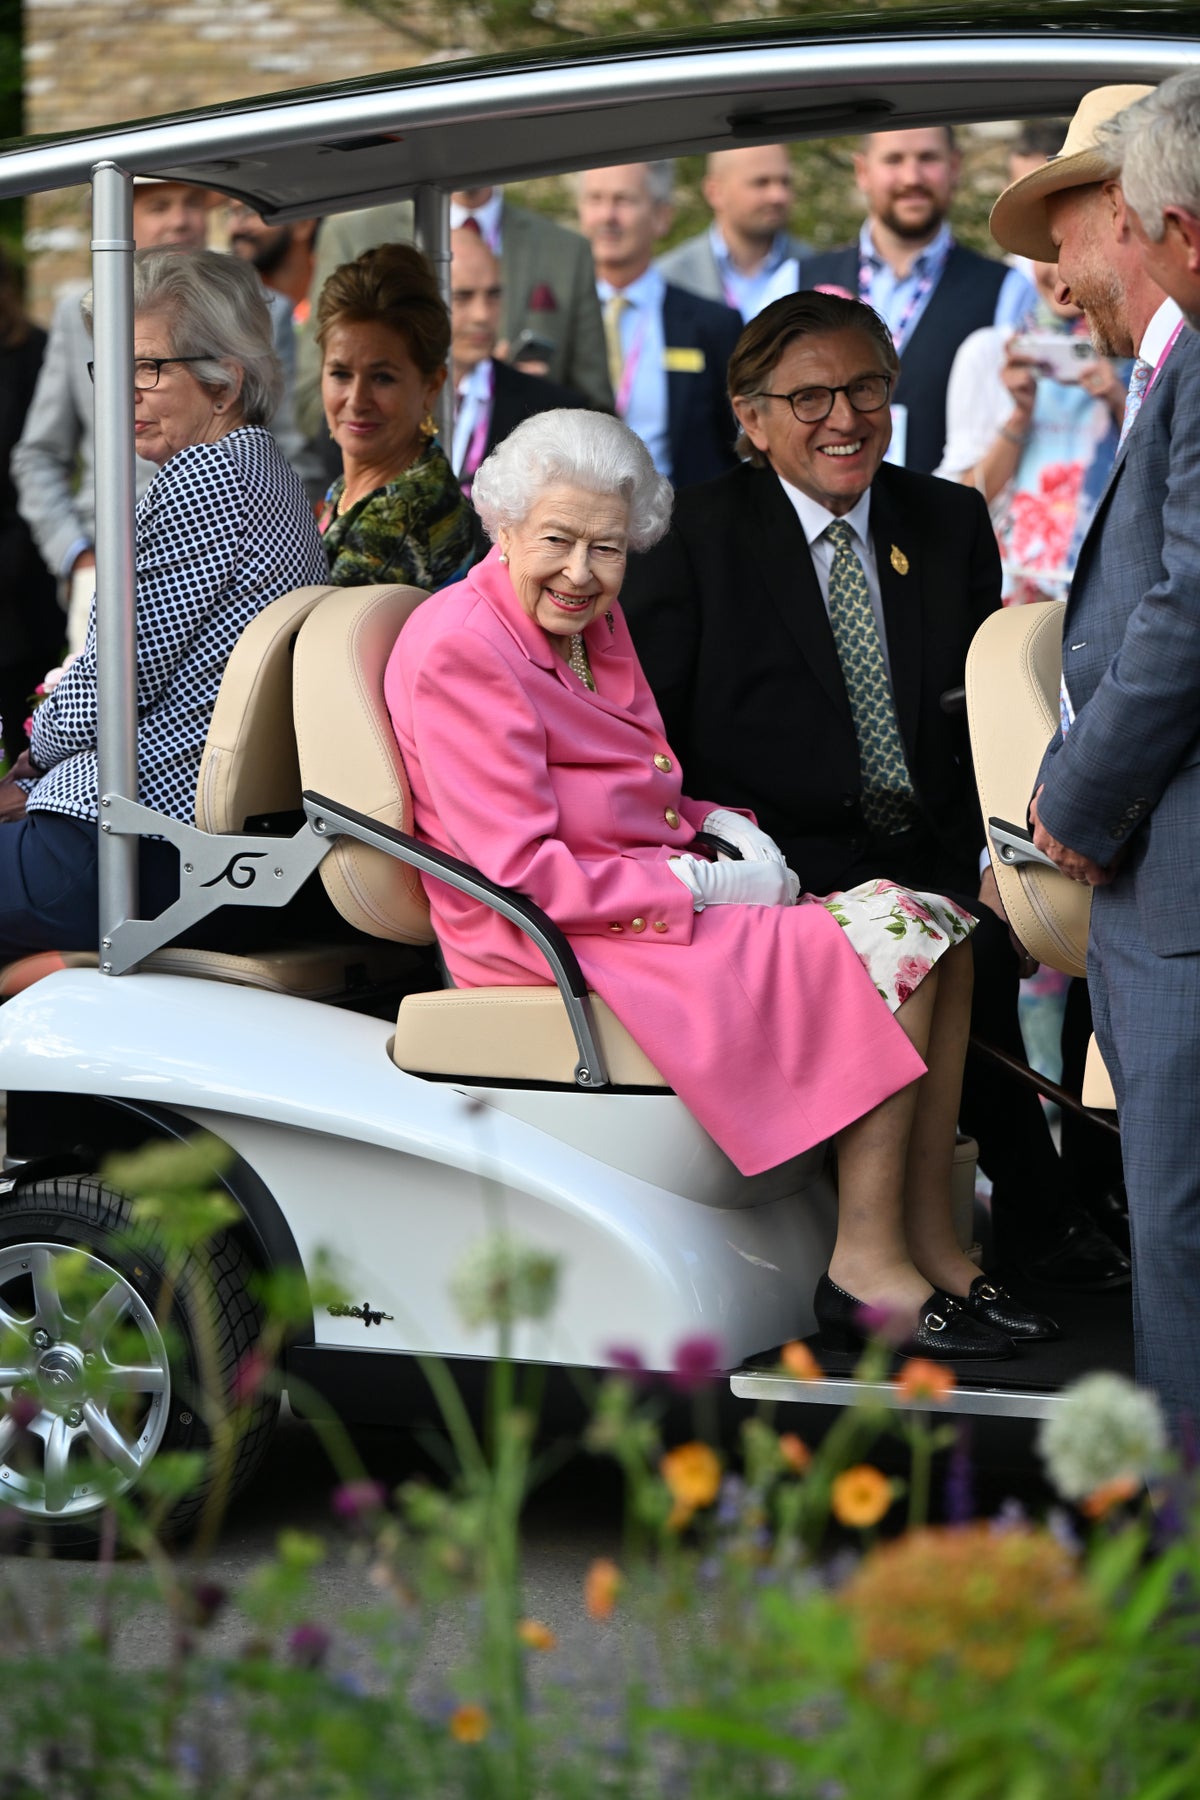 Close eye kept on Queen during busy Jubilee commitments